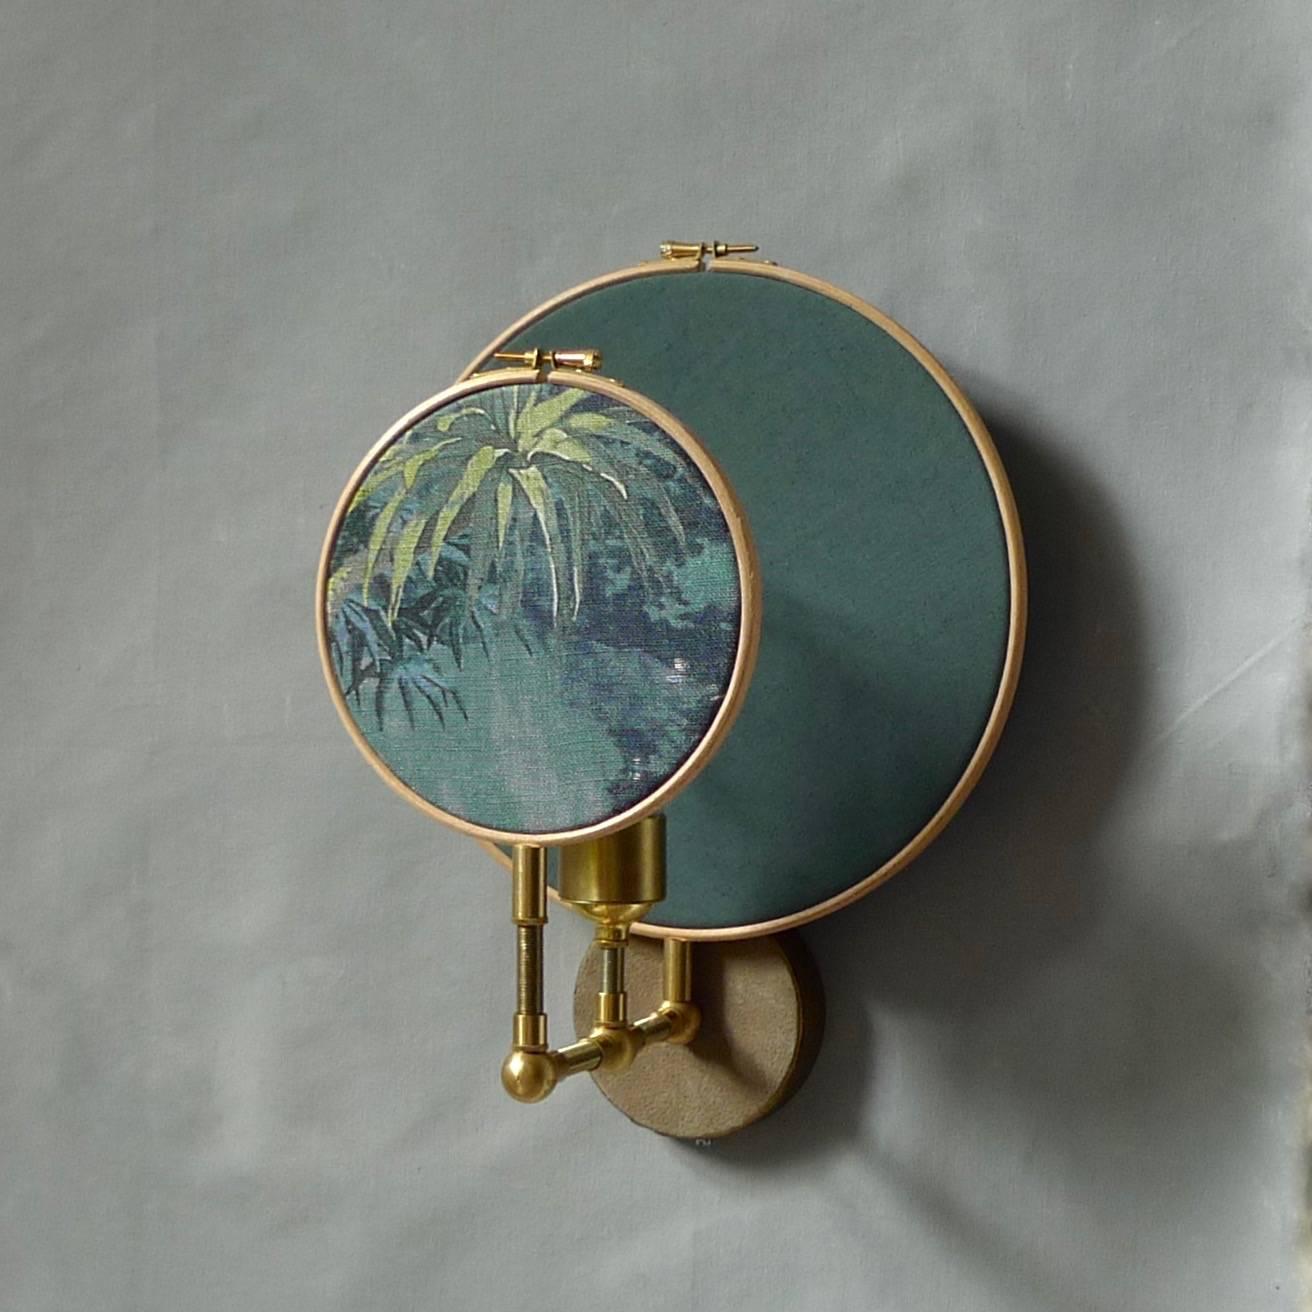 Circle blue grey wall sconce, Sander Bottinga
Handmade in brass, leather, wood and hand printed and painted linen.
A dimmer is inlaid with leather. Also possible without a dimmer
Dimensions: H 35 x W 27 x D 23 cm 
The design artwork is